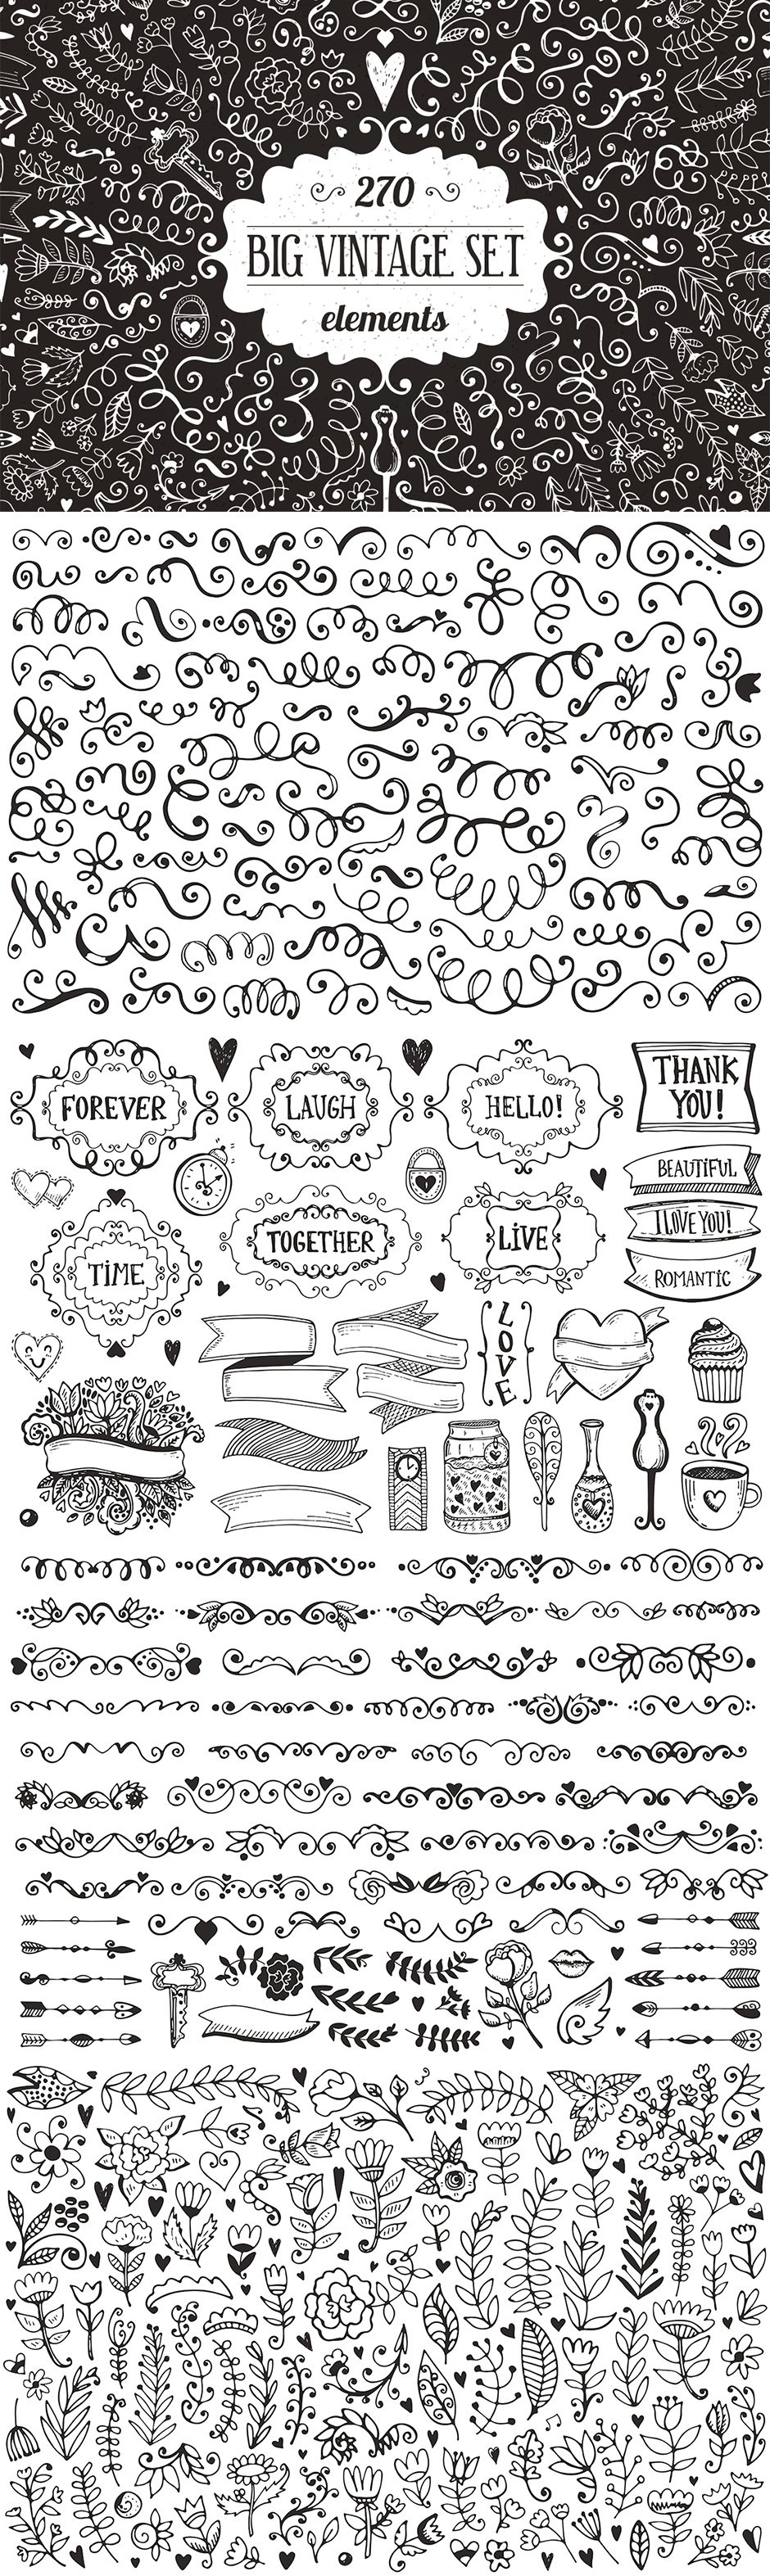 The Essential Hand-Made Vectors Collection